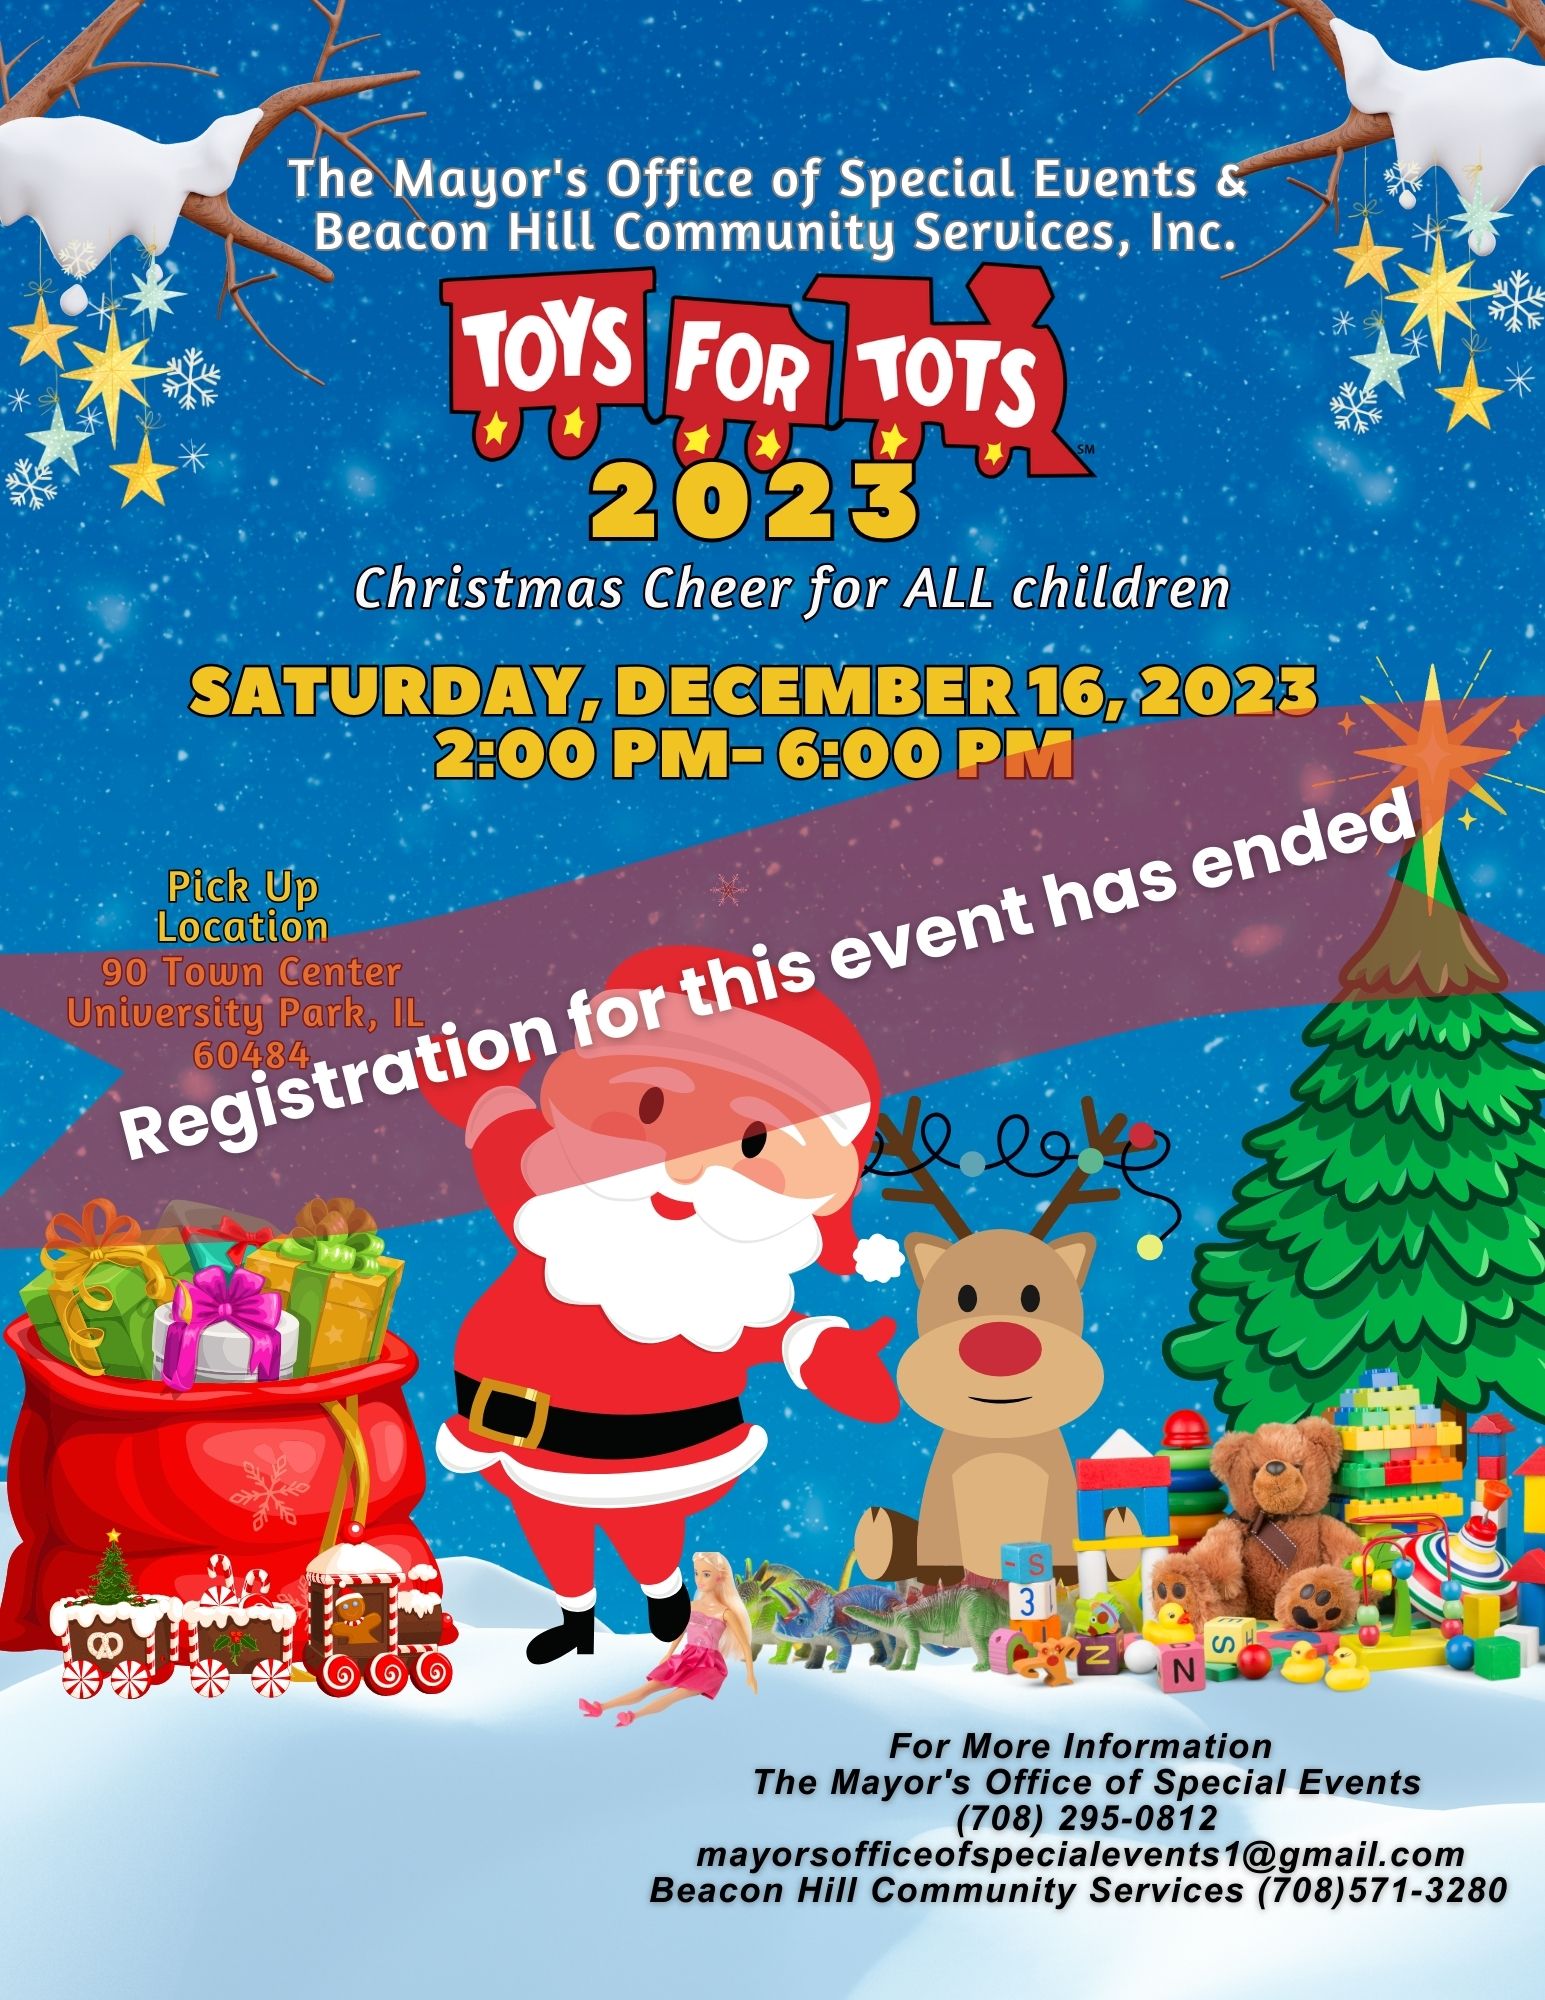 Toys for Tots Registration has ended